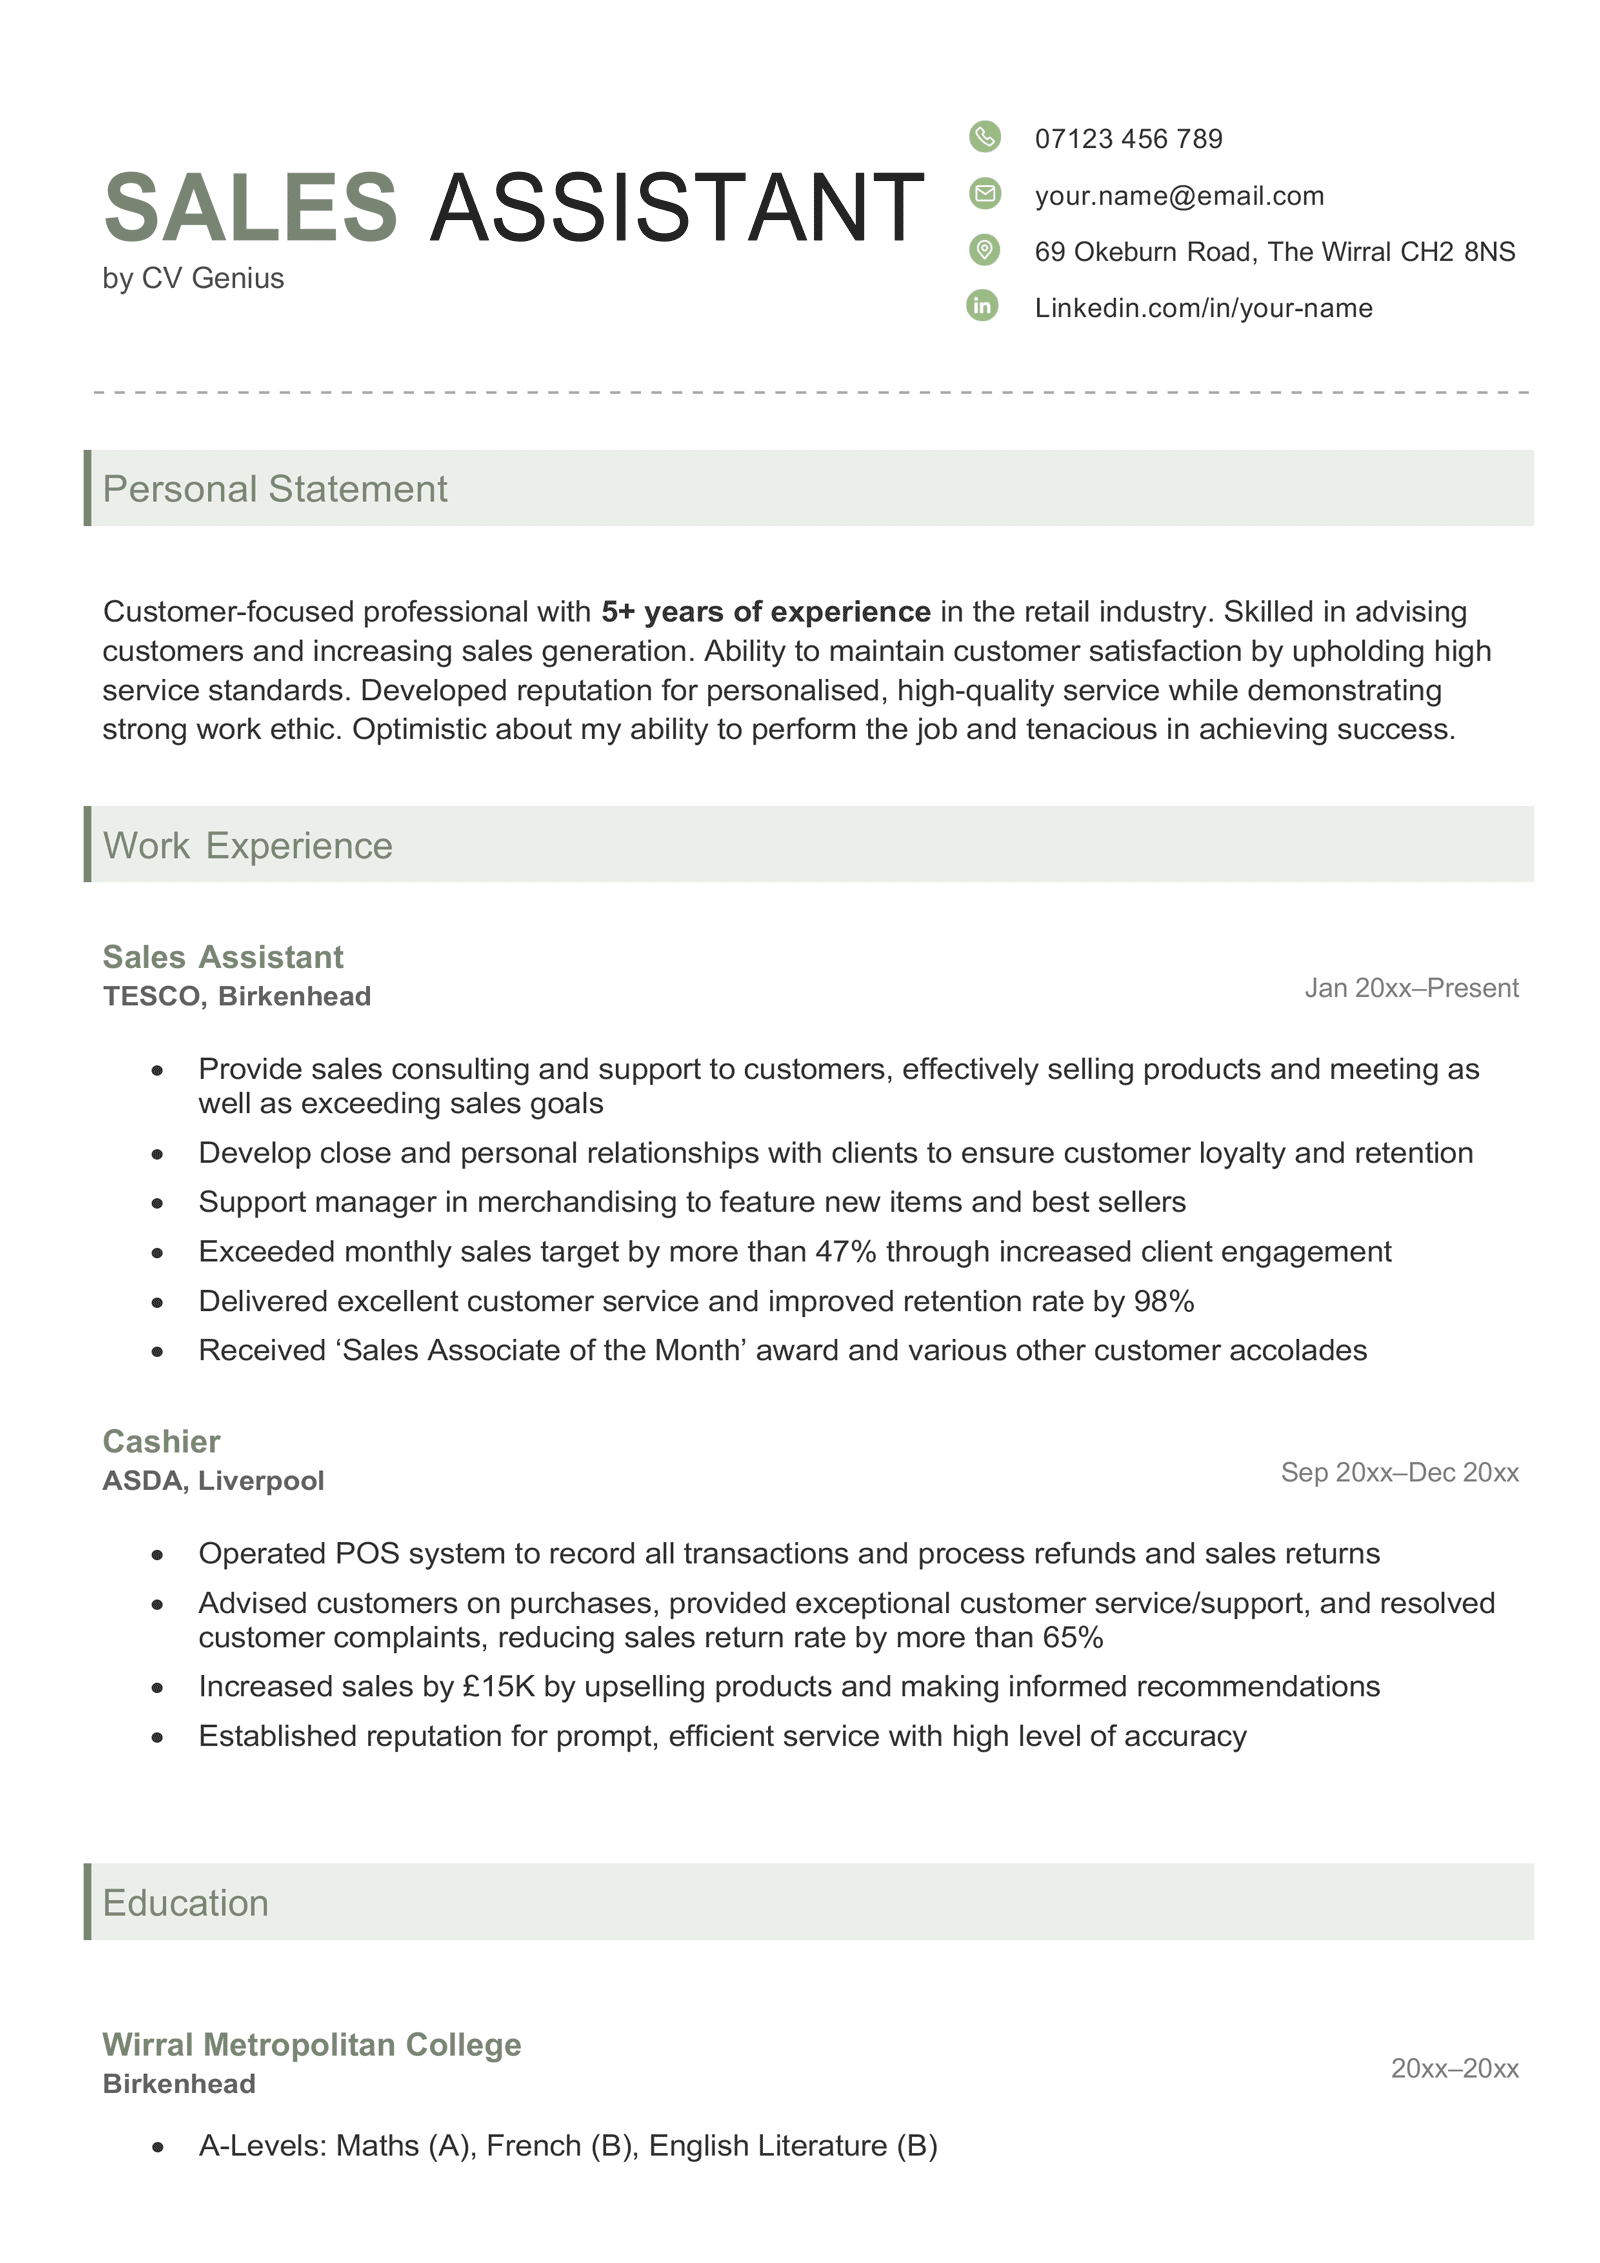 An example sales assistant CV